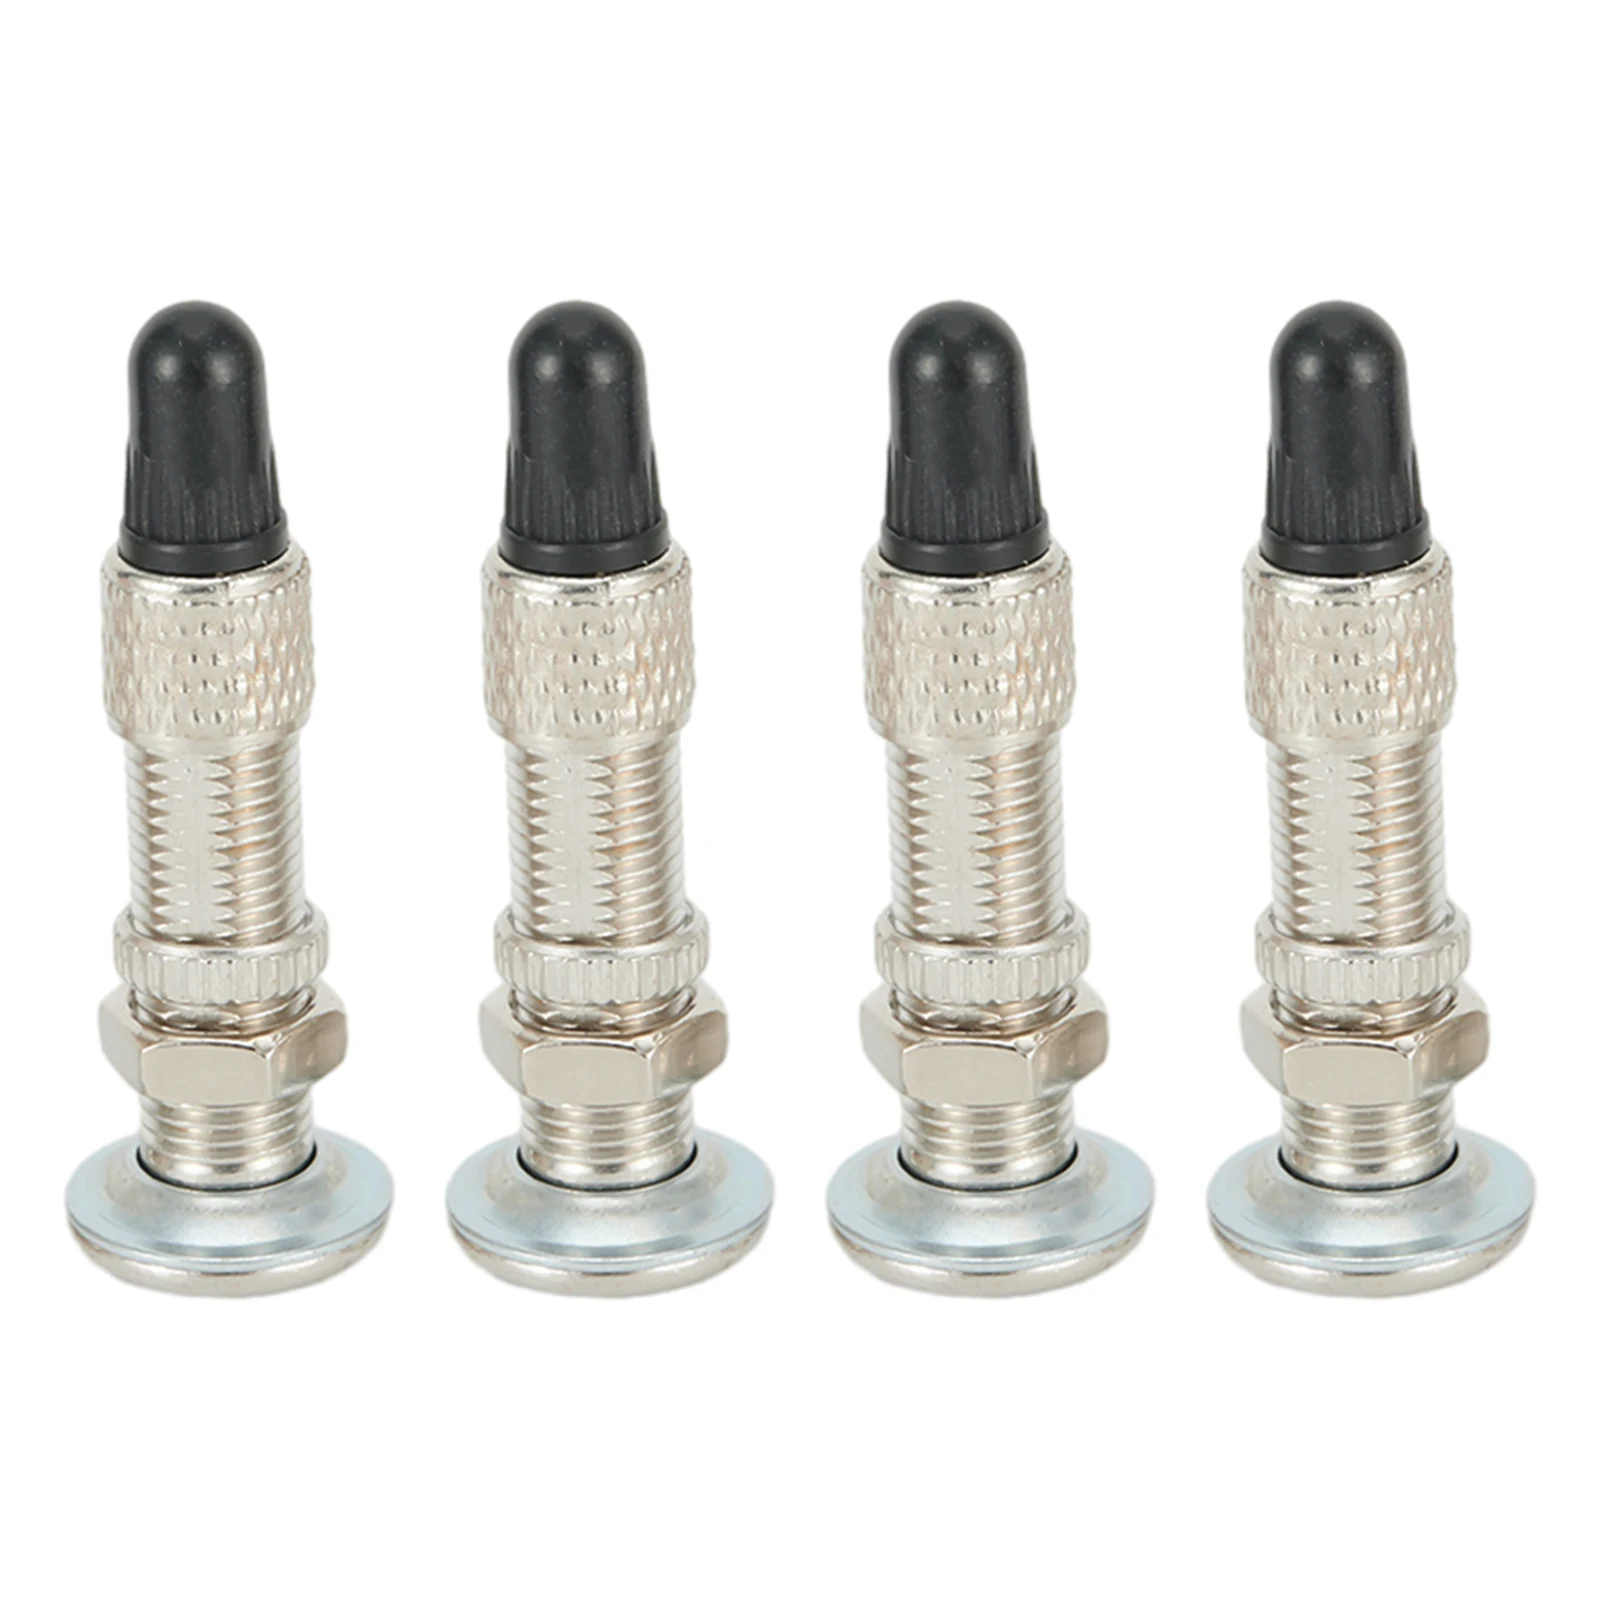 

4pcs Bicycle Tubeless Valve Core Mountain Bike Dunlop Valve Core Replacement Repair Tools Cycling Bicycle Accessories